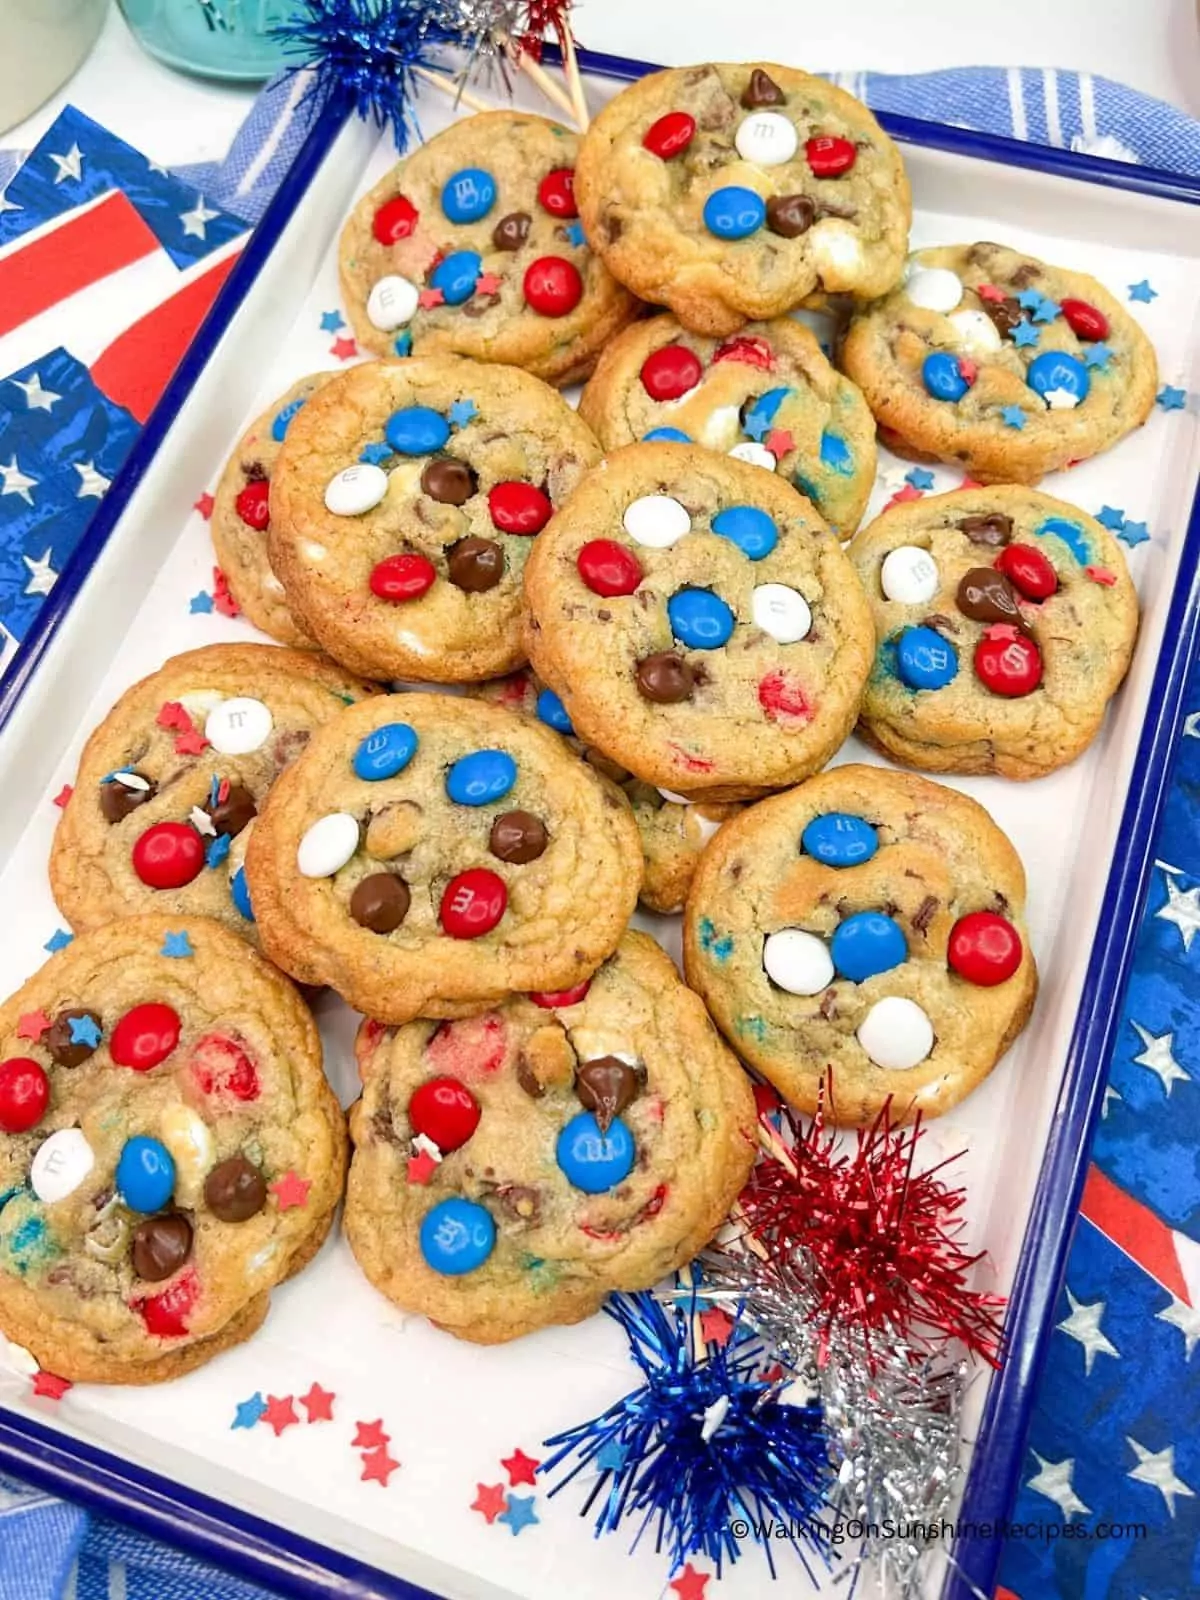 tray of chocolate chip cookies with red, white and blue candy pieces.